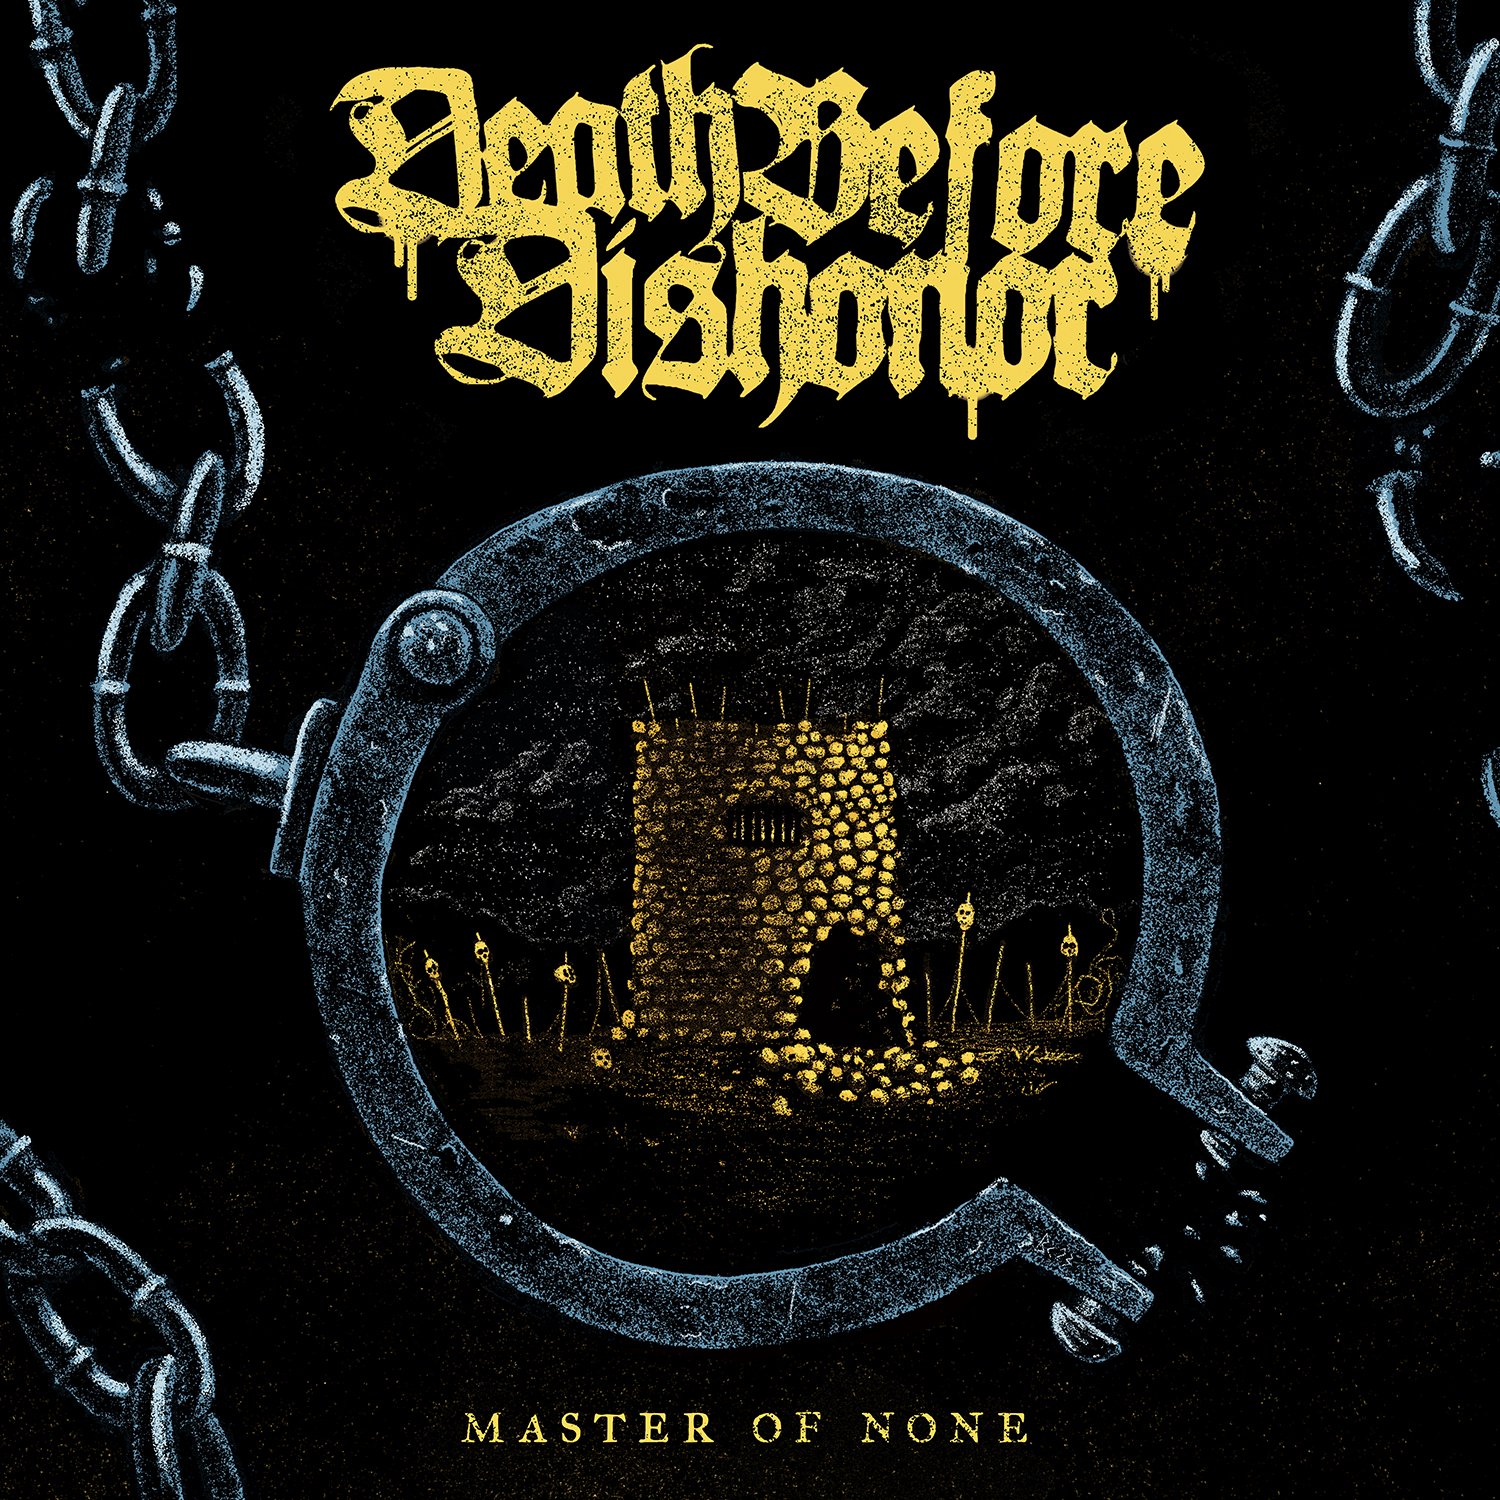 DEATH BEFORE DISHONOR "Master Of None"